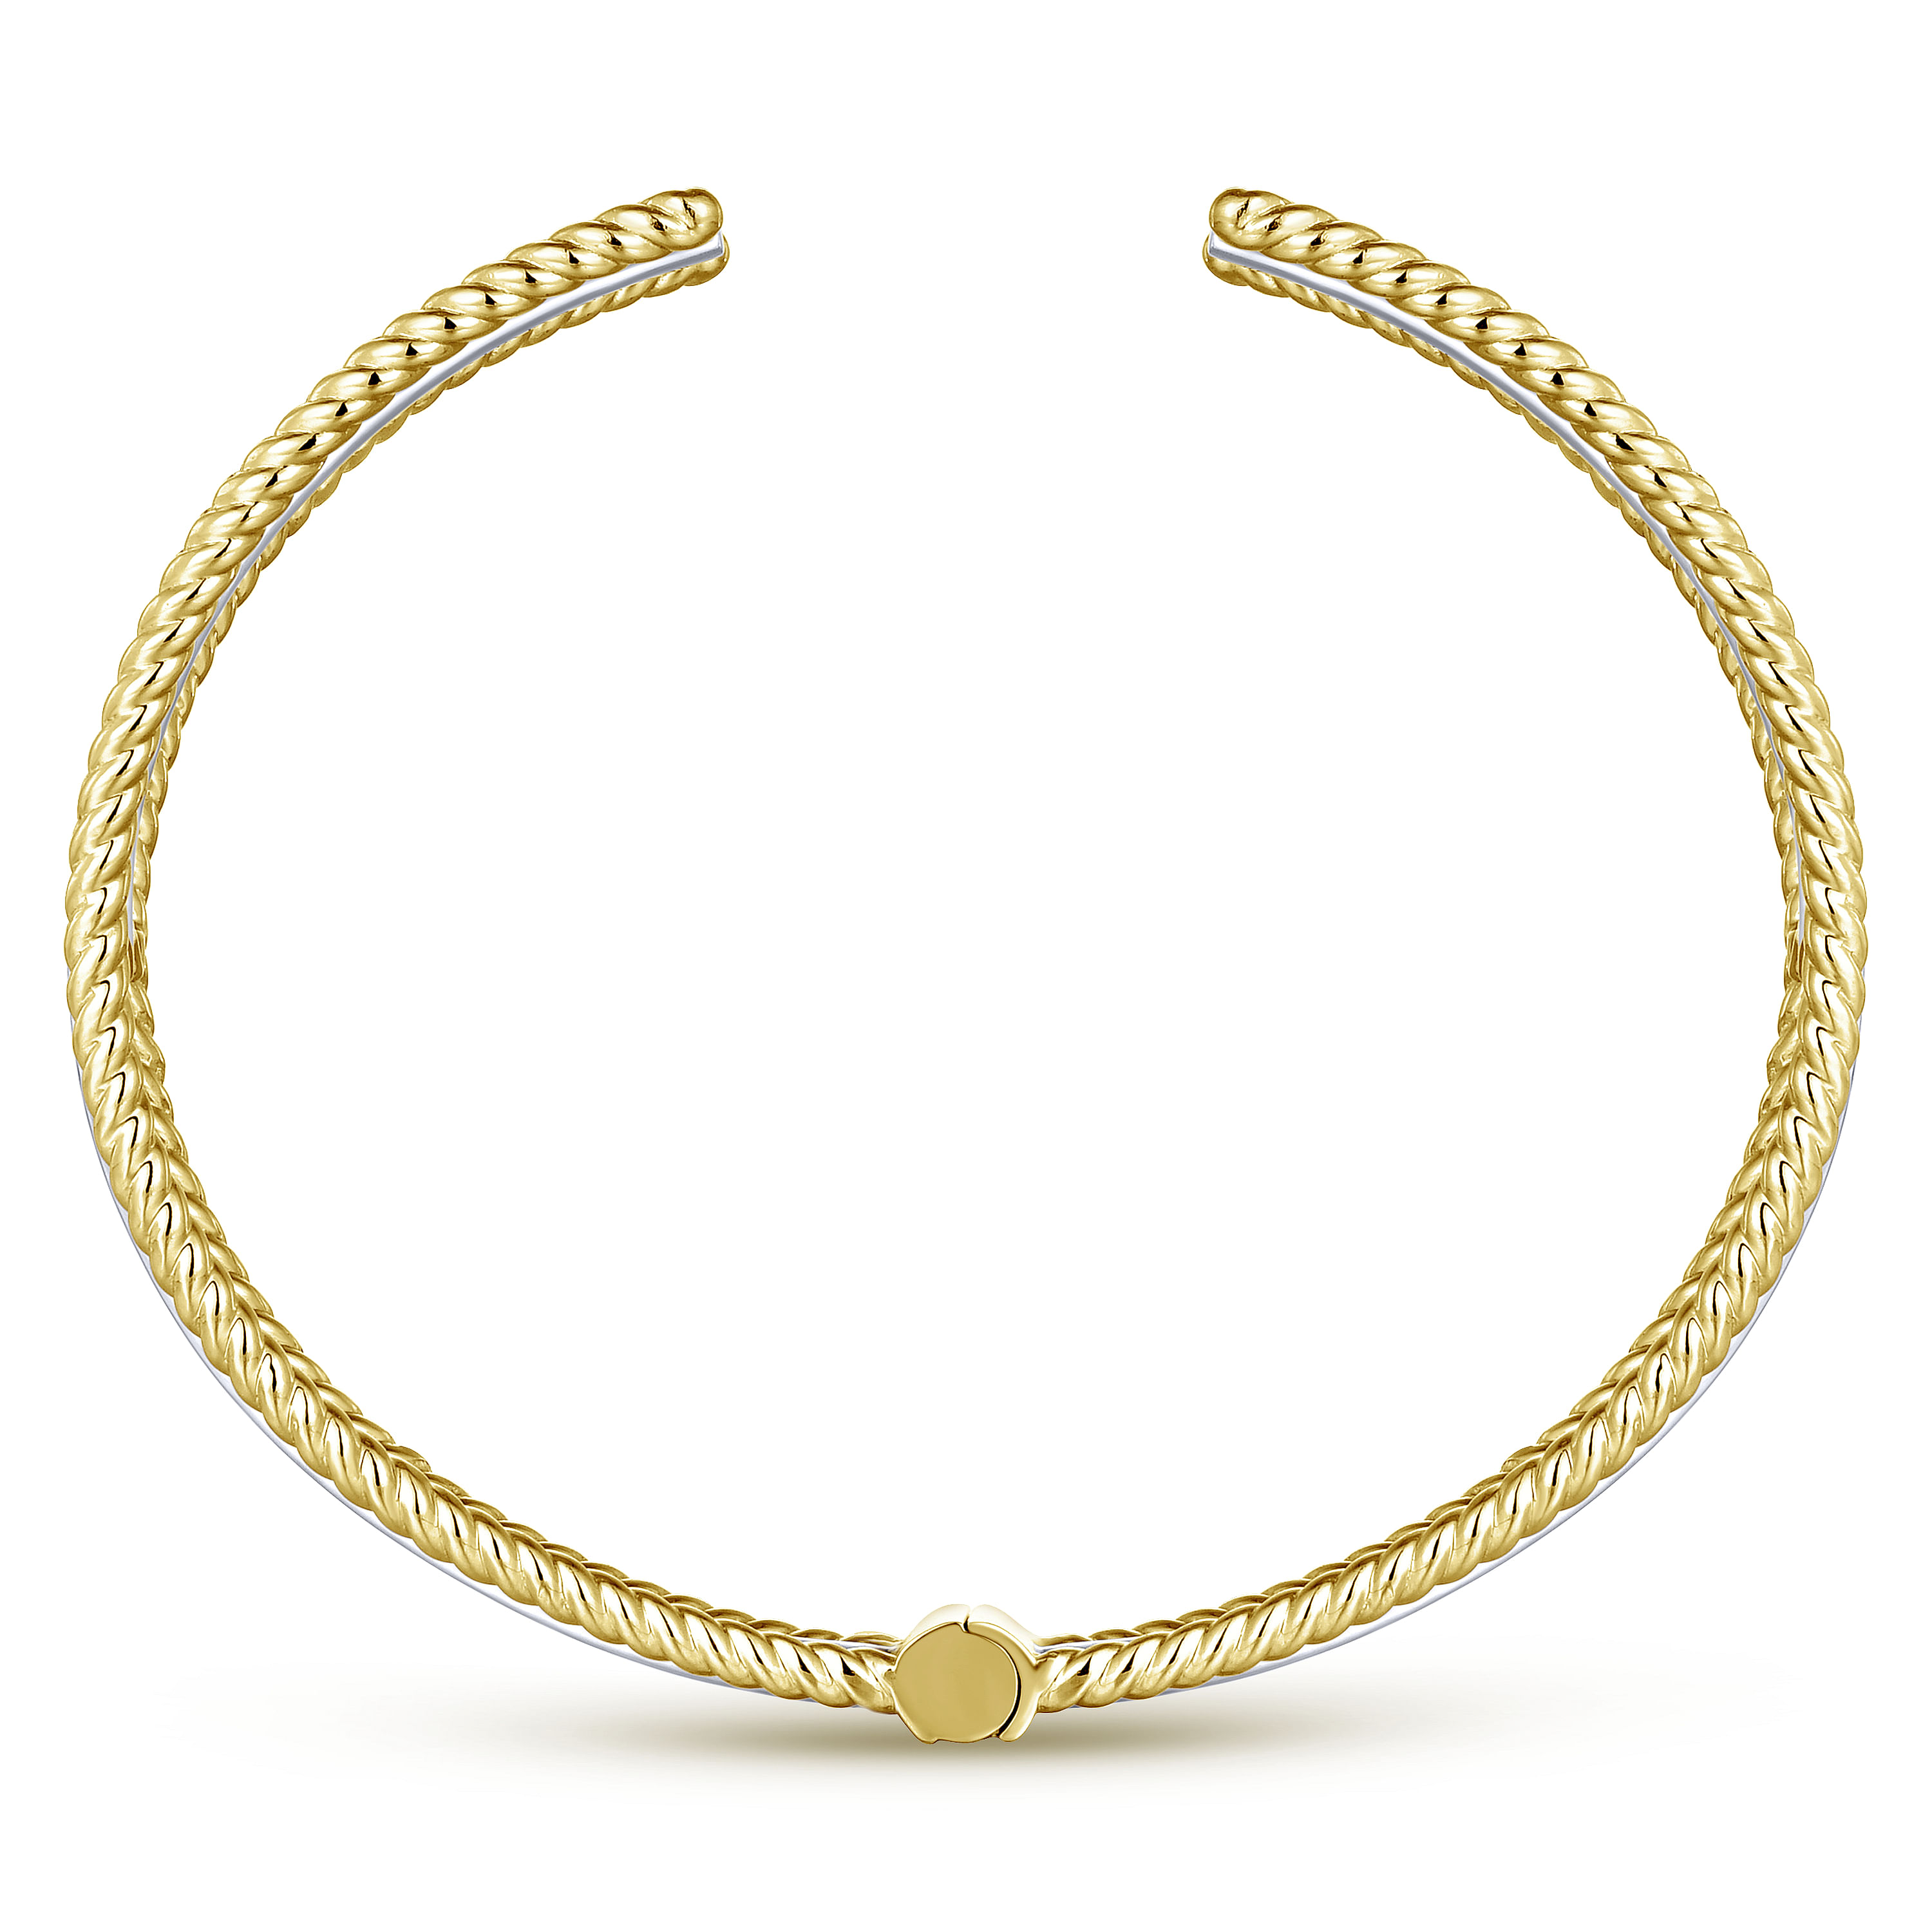 Twisted 14K White and Yellow Gold Bangle with Diamonds